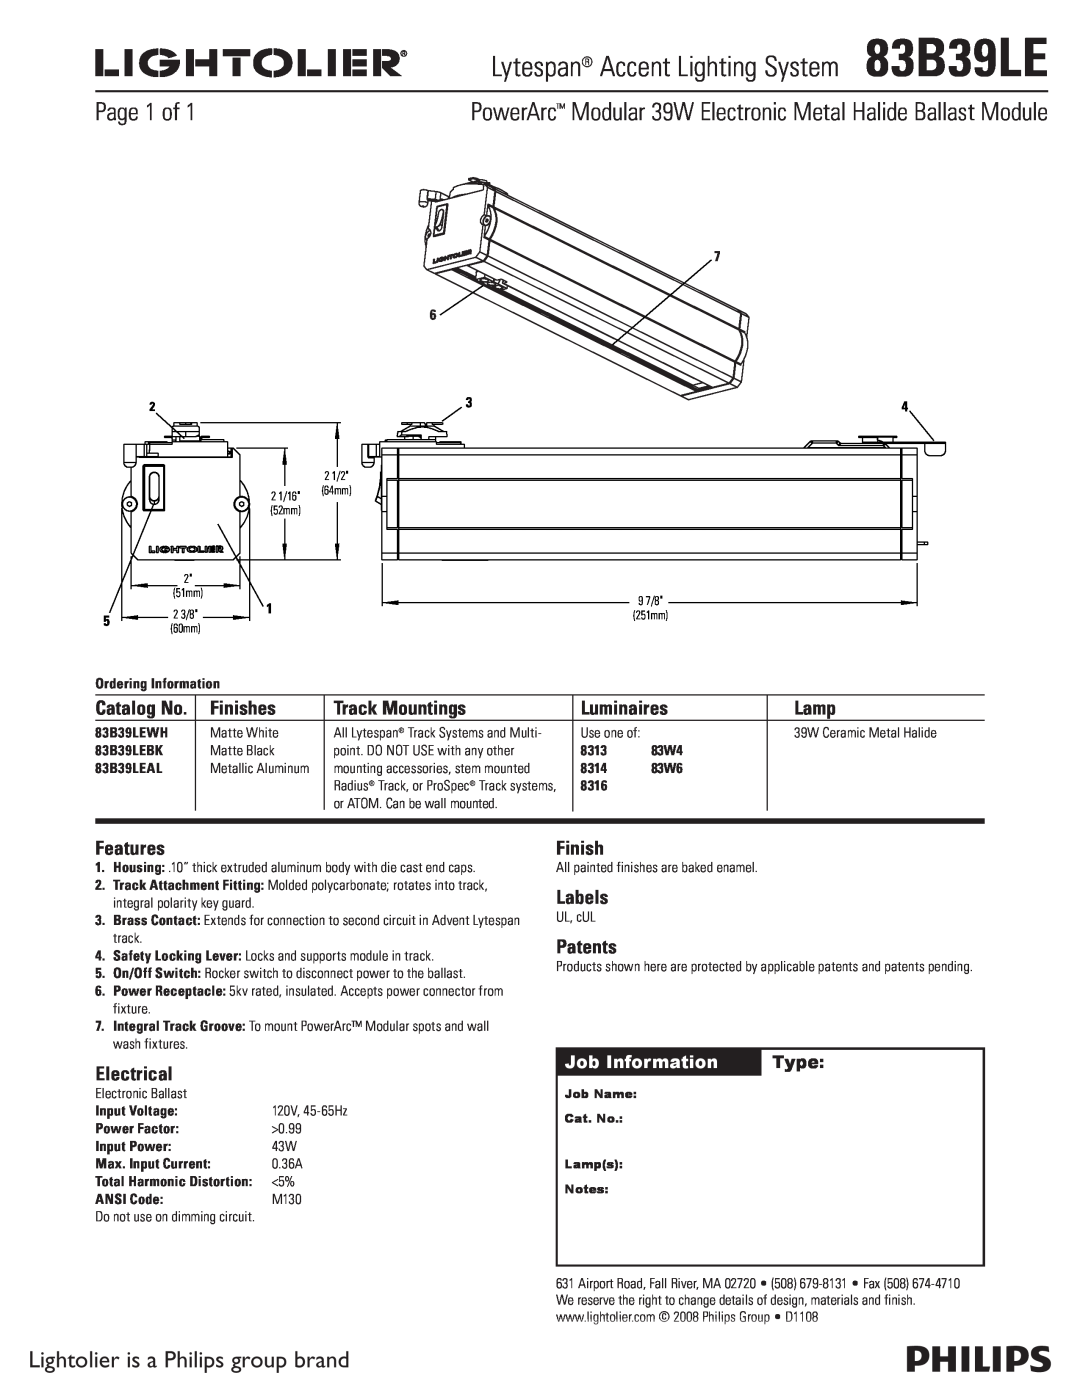 Lightolier manual Lytespan Accent Lighting System83B39LE, Page 1 of, Lightolier is a Philips group brand, Finishes 